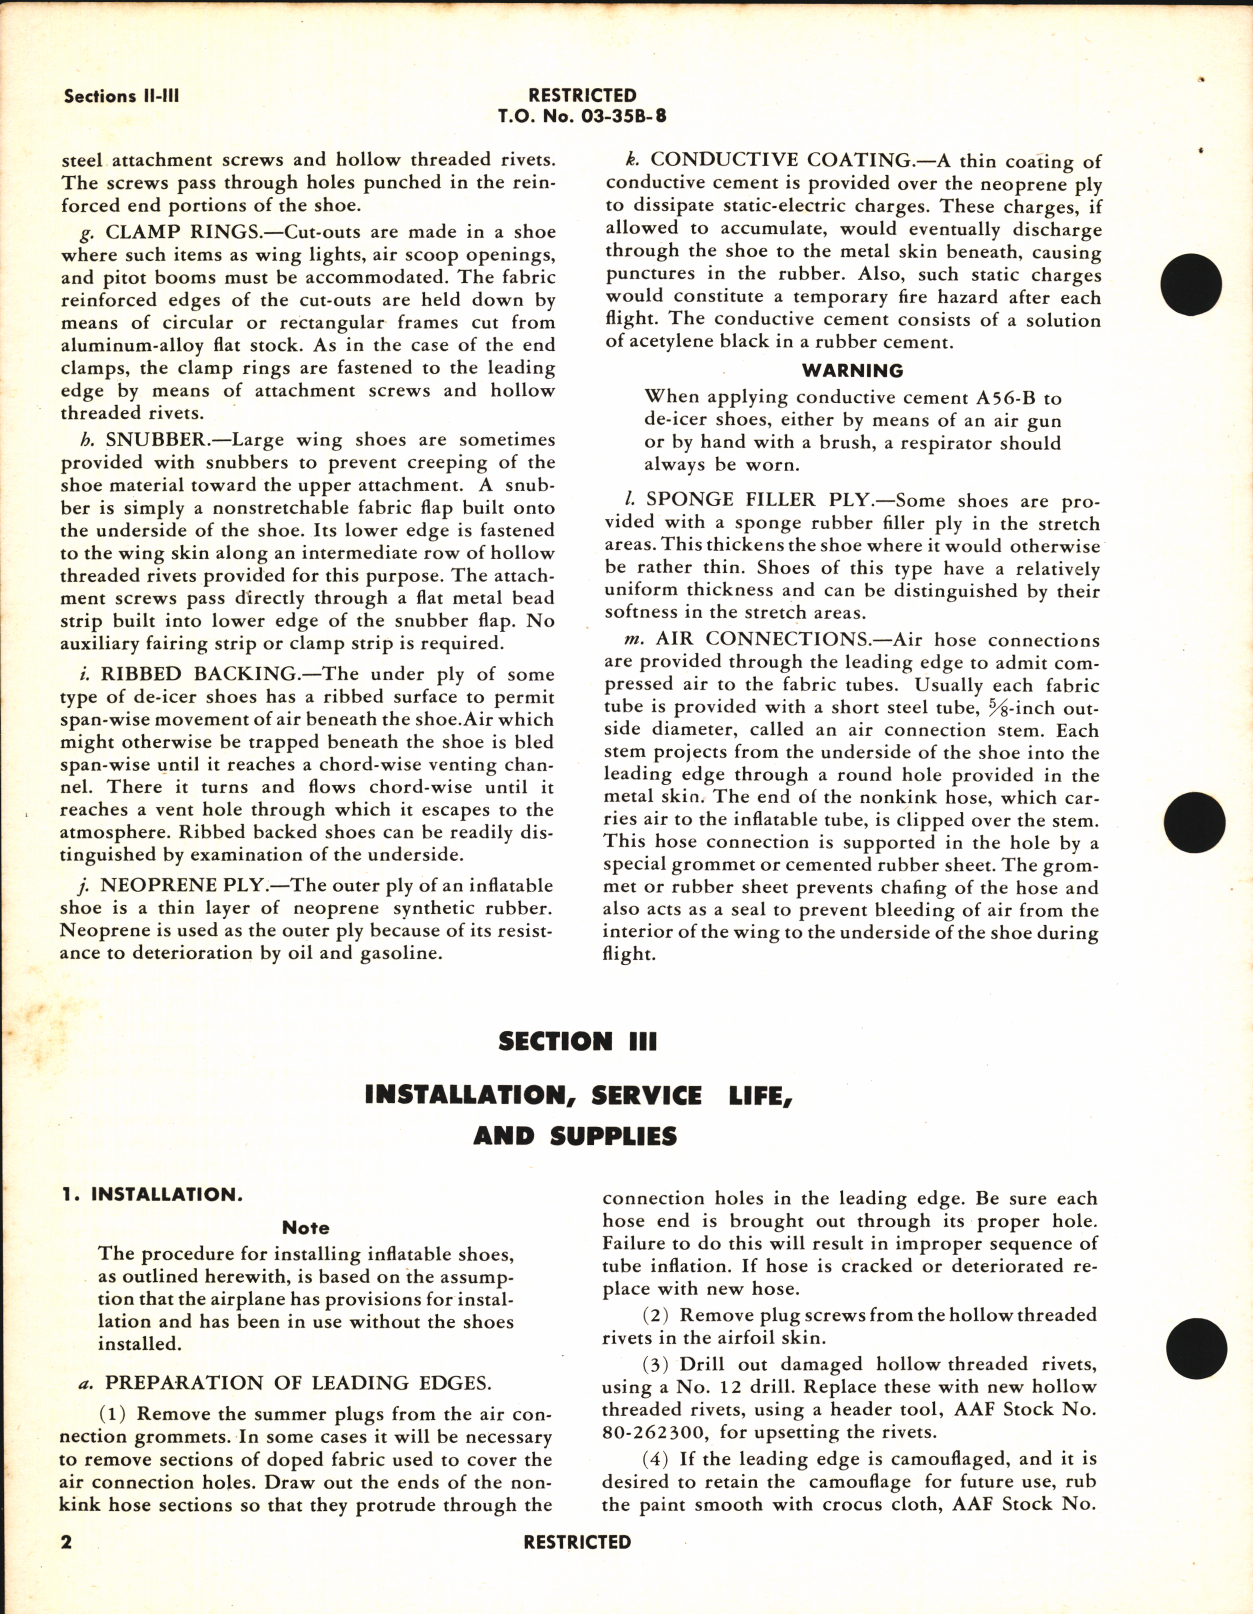 Sample page 6 from AirCorps Library document: Handbook of Instructions for Installation, Repair, and Storage of De-Icer Shoes